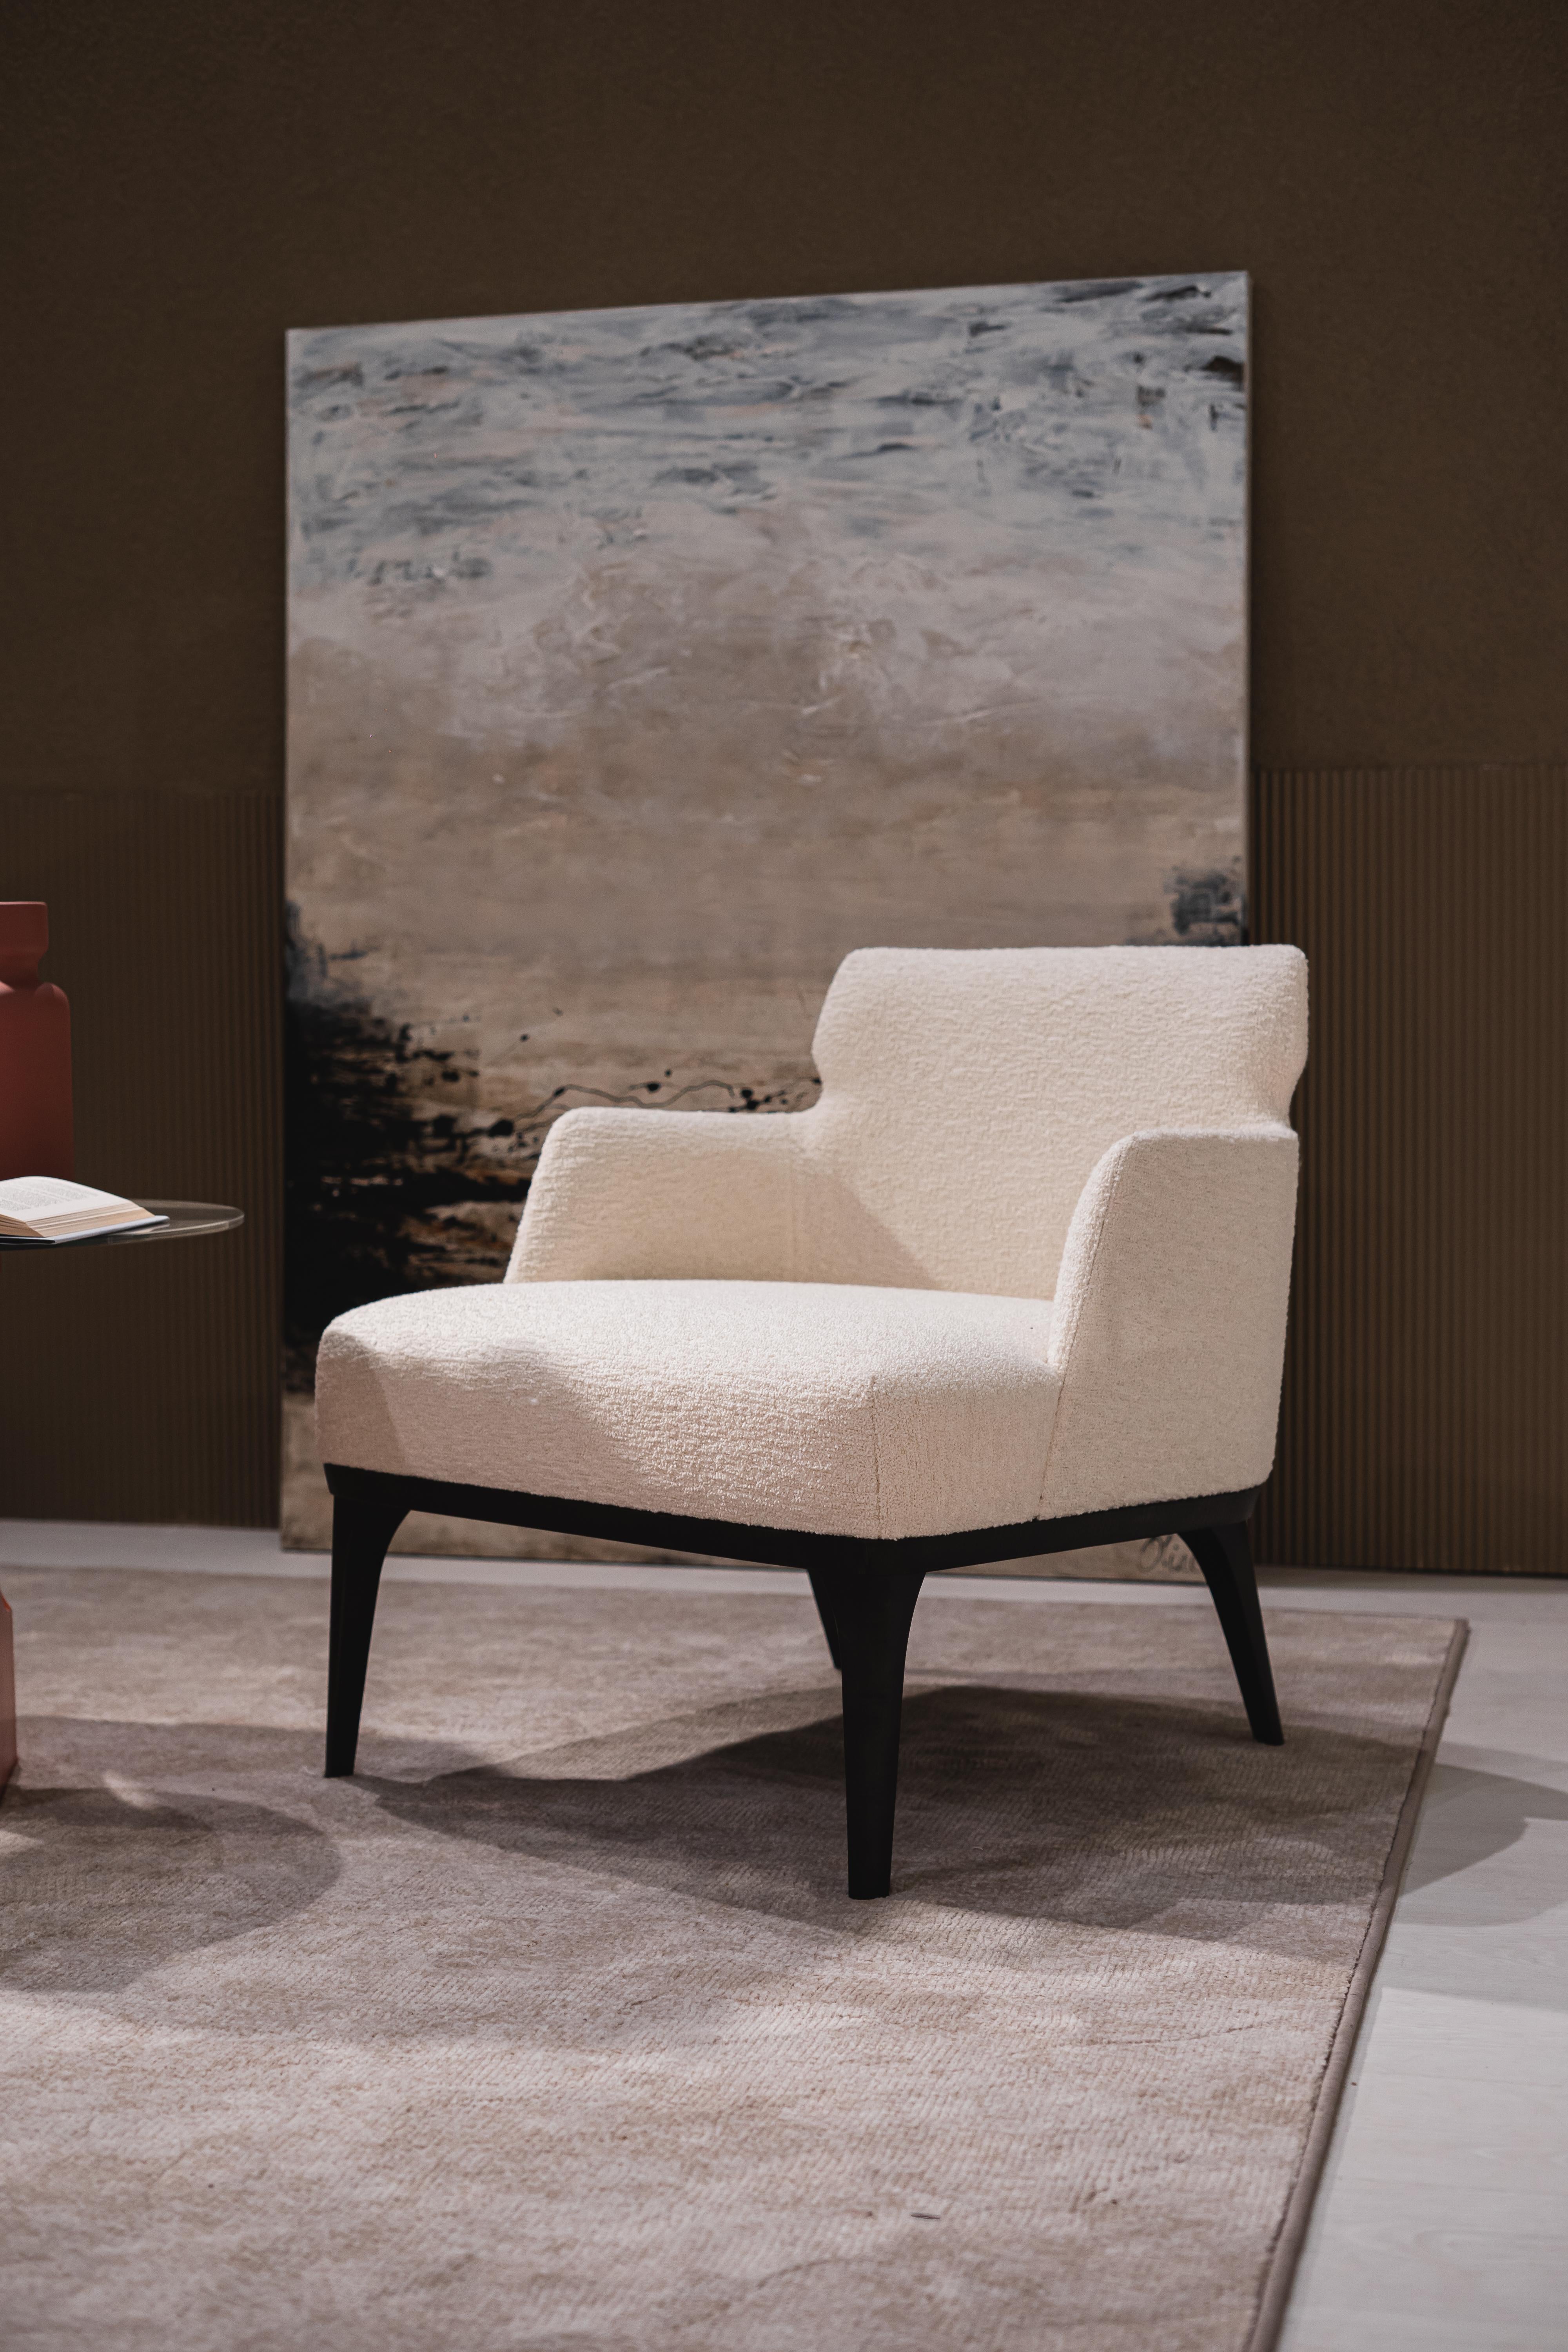 Armchair from the Shape line, internal wooden structure, polyurethane padding in different densities, solid wood feet in dark Tay shade. Also available in Canaletta walnut tone.
Upholstery available in various fabrics, leather and Nabuk.